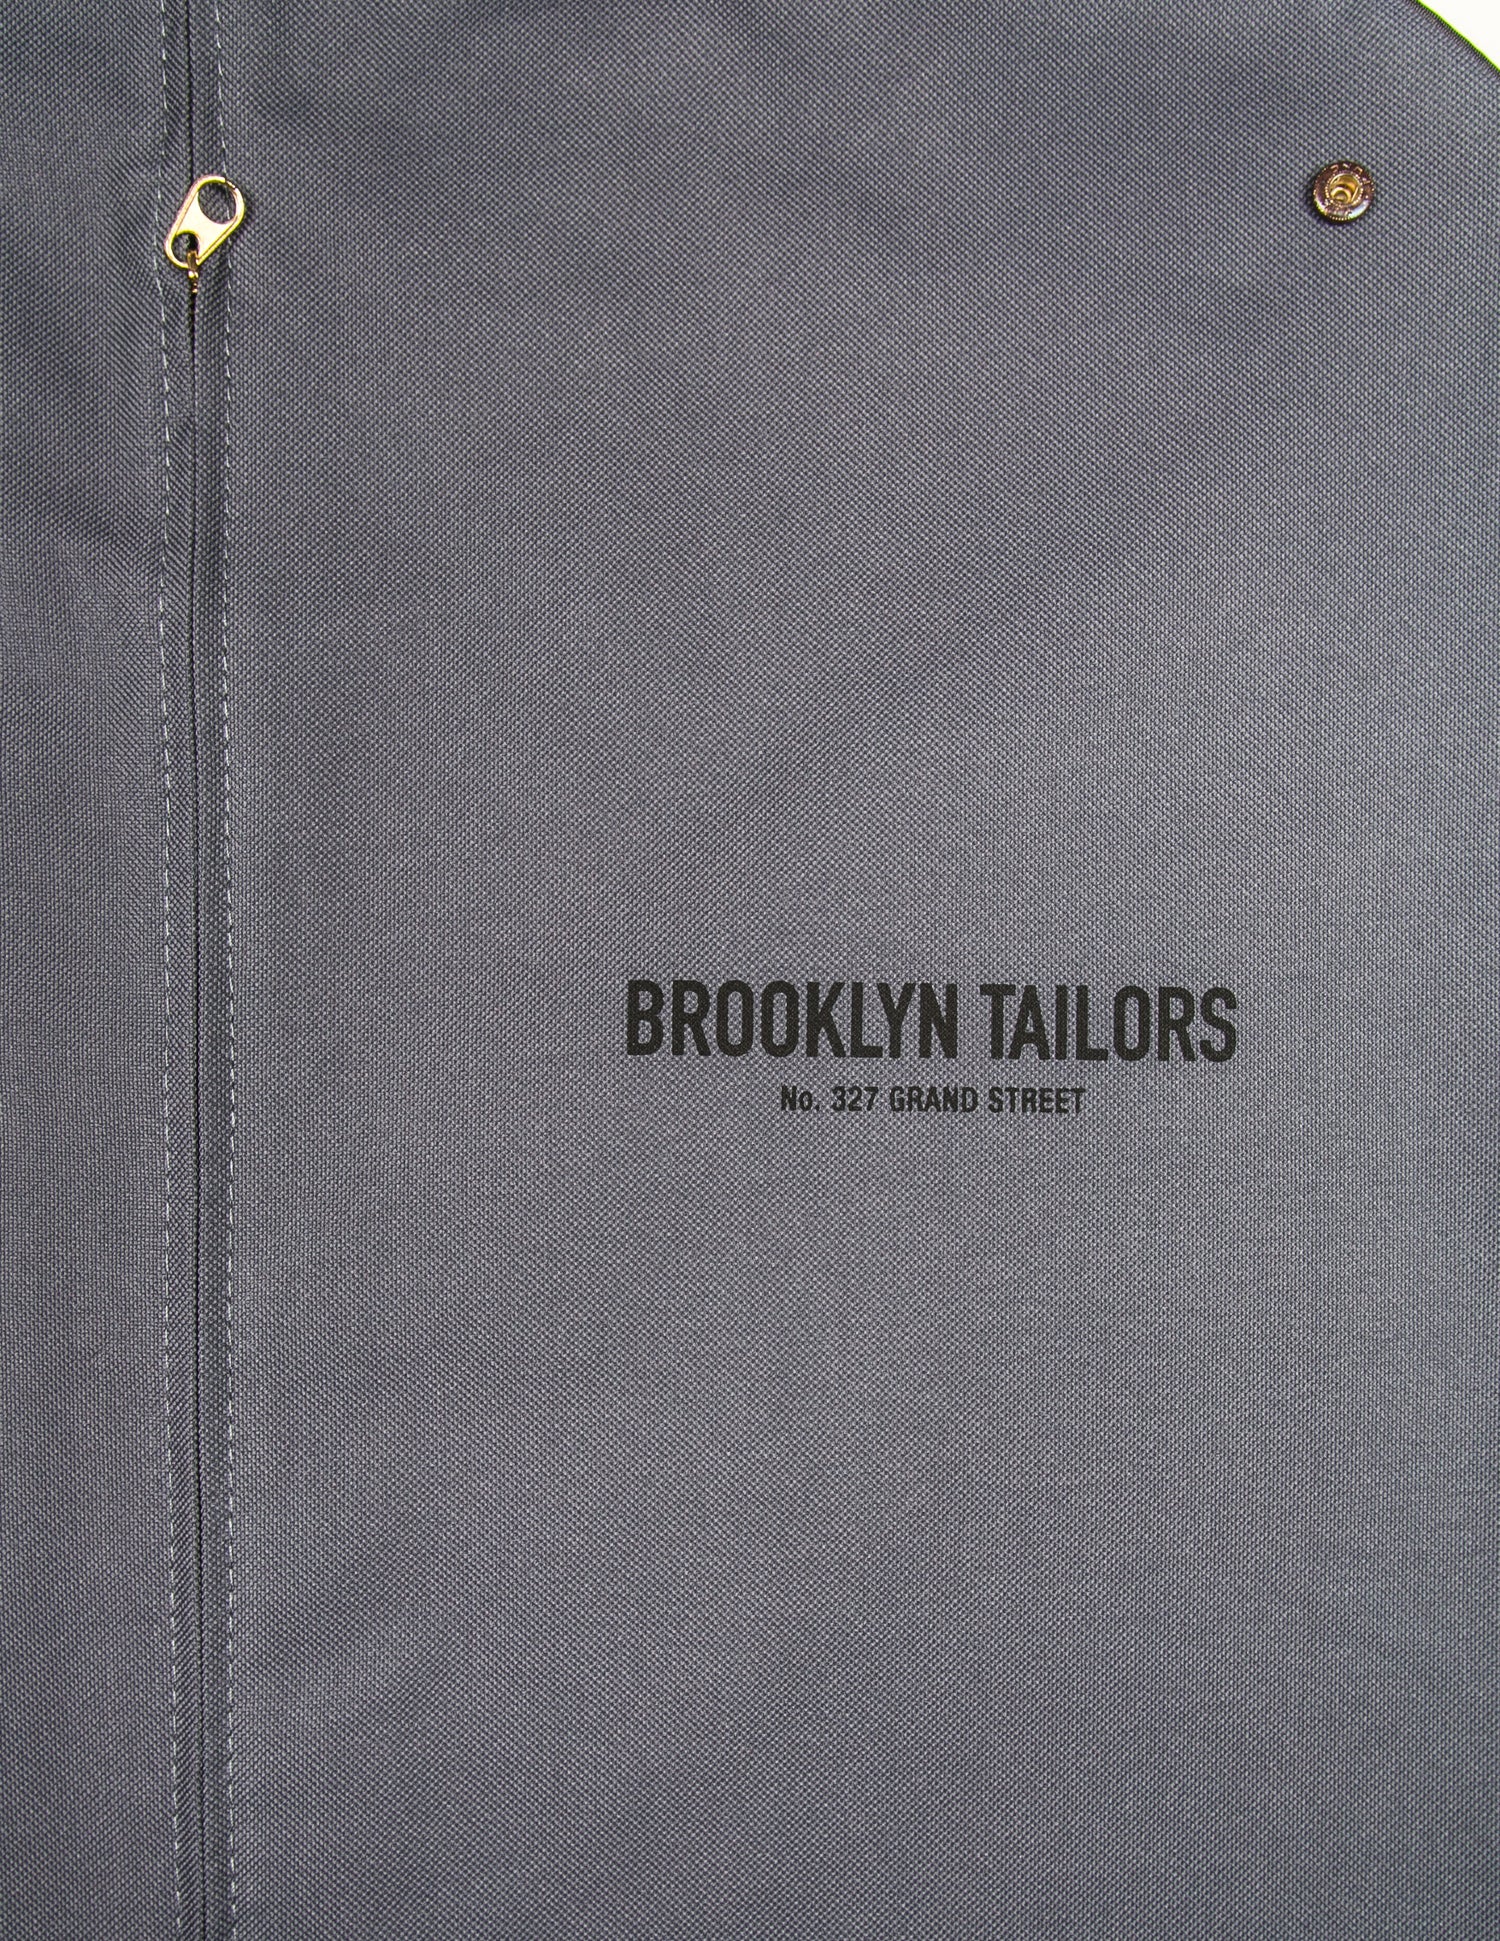 Detail of Brooklyn Tailors BROOKLYN TAILORS - Deluxe Garment Bag showing zipper, snap, and logo